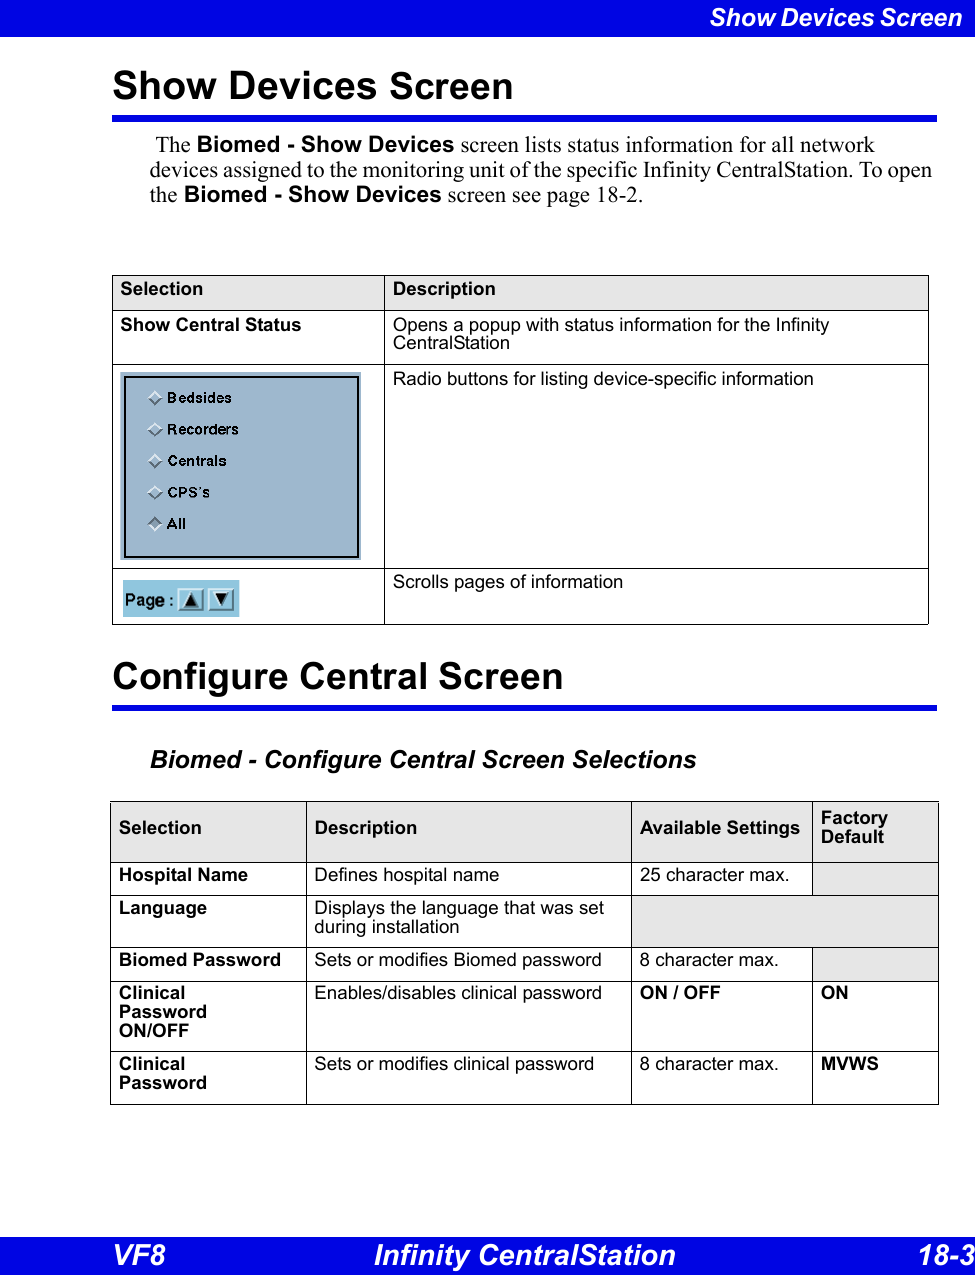 Show Devices Screen VF8 Infinity CentralStation 18-3 Show Devices Screen The Biomed - Show Devices screen lists status information for all network devices assigned to the monitoring unit of the specific Infinity CentralStation. To open the Biomed - Show Devices screen see page 18-2. Configure Central ScreenBiomed - Configure Central Screen SelectionsSelection DescriptionShow Central Status  Opens a popup with status information for the Infinity CentralStation Radio buttons for listing device-specific informationScrolls pages of informationSelection Description Available Settings Factory DefaultHospital Name Defines hospital name 25 character max.Language Displays the language that was set during installationBiomed Password Sets or modifies Biomed password 8 character max.Clinical Password ON/OFF Enables/disables clinical password ON / OFF ONClinical PasswordSets or modifies clinical password 8 character max. MVWS